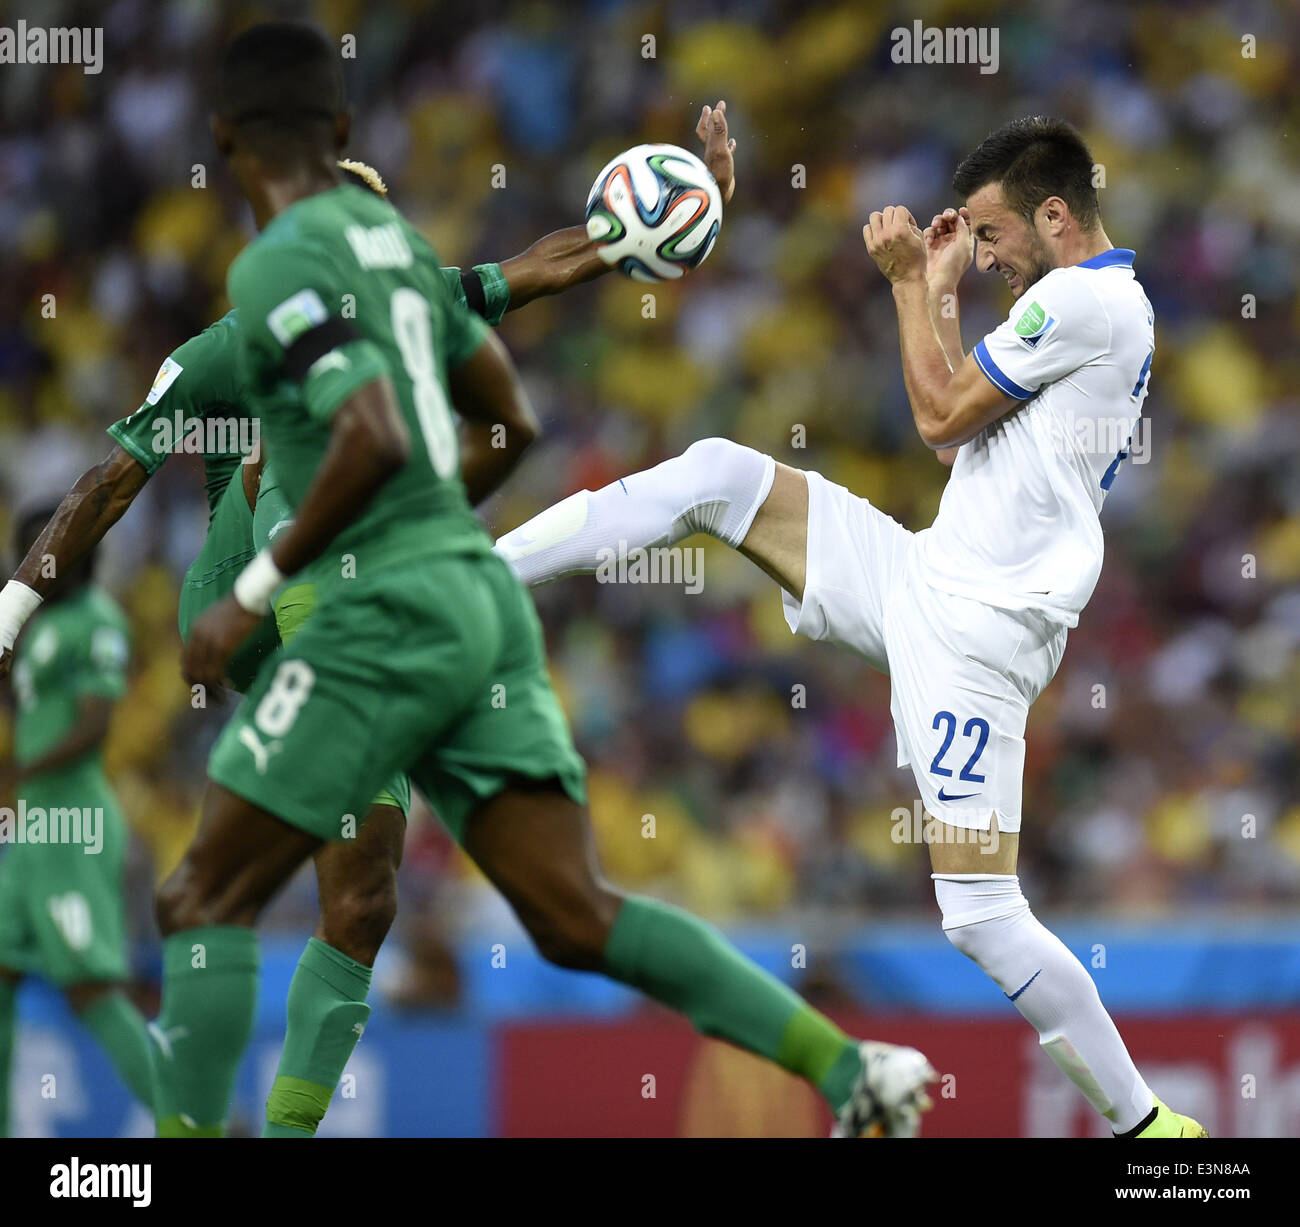 Fortaleza, Brazil. 24th June, 2014. Greece's Andreas Samaris (R) competes during a Group C match between Greece and Cote d'Ivoire of 2014 FIFA World Cup at the Estadio Castelao Stadium in Fortaleza, Brazil, June 24, 2014. Credit:  Yang Lei/Xinhua/Alamy Live News Stock Photo